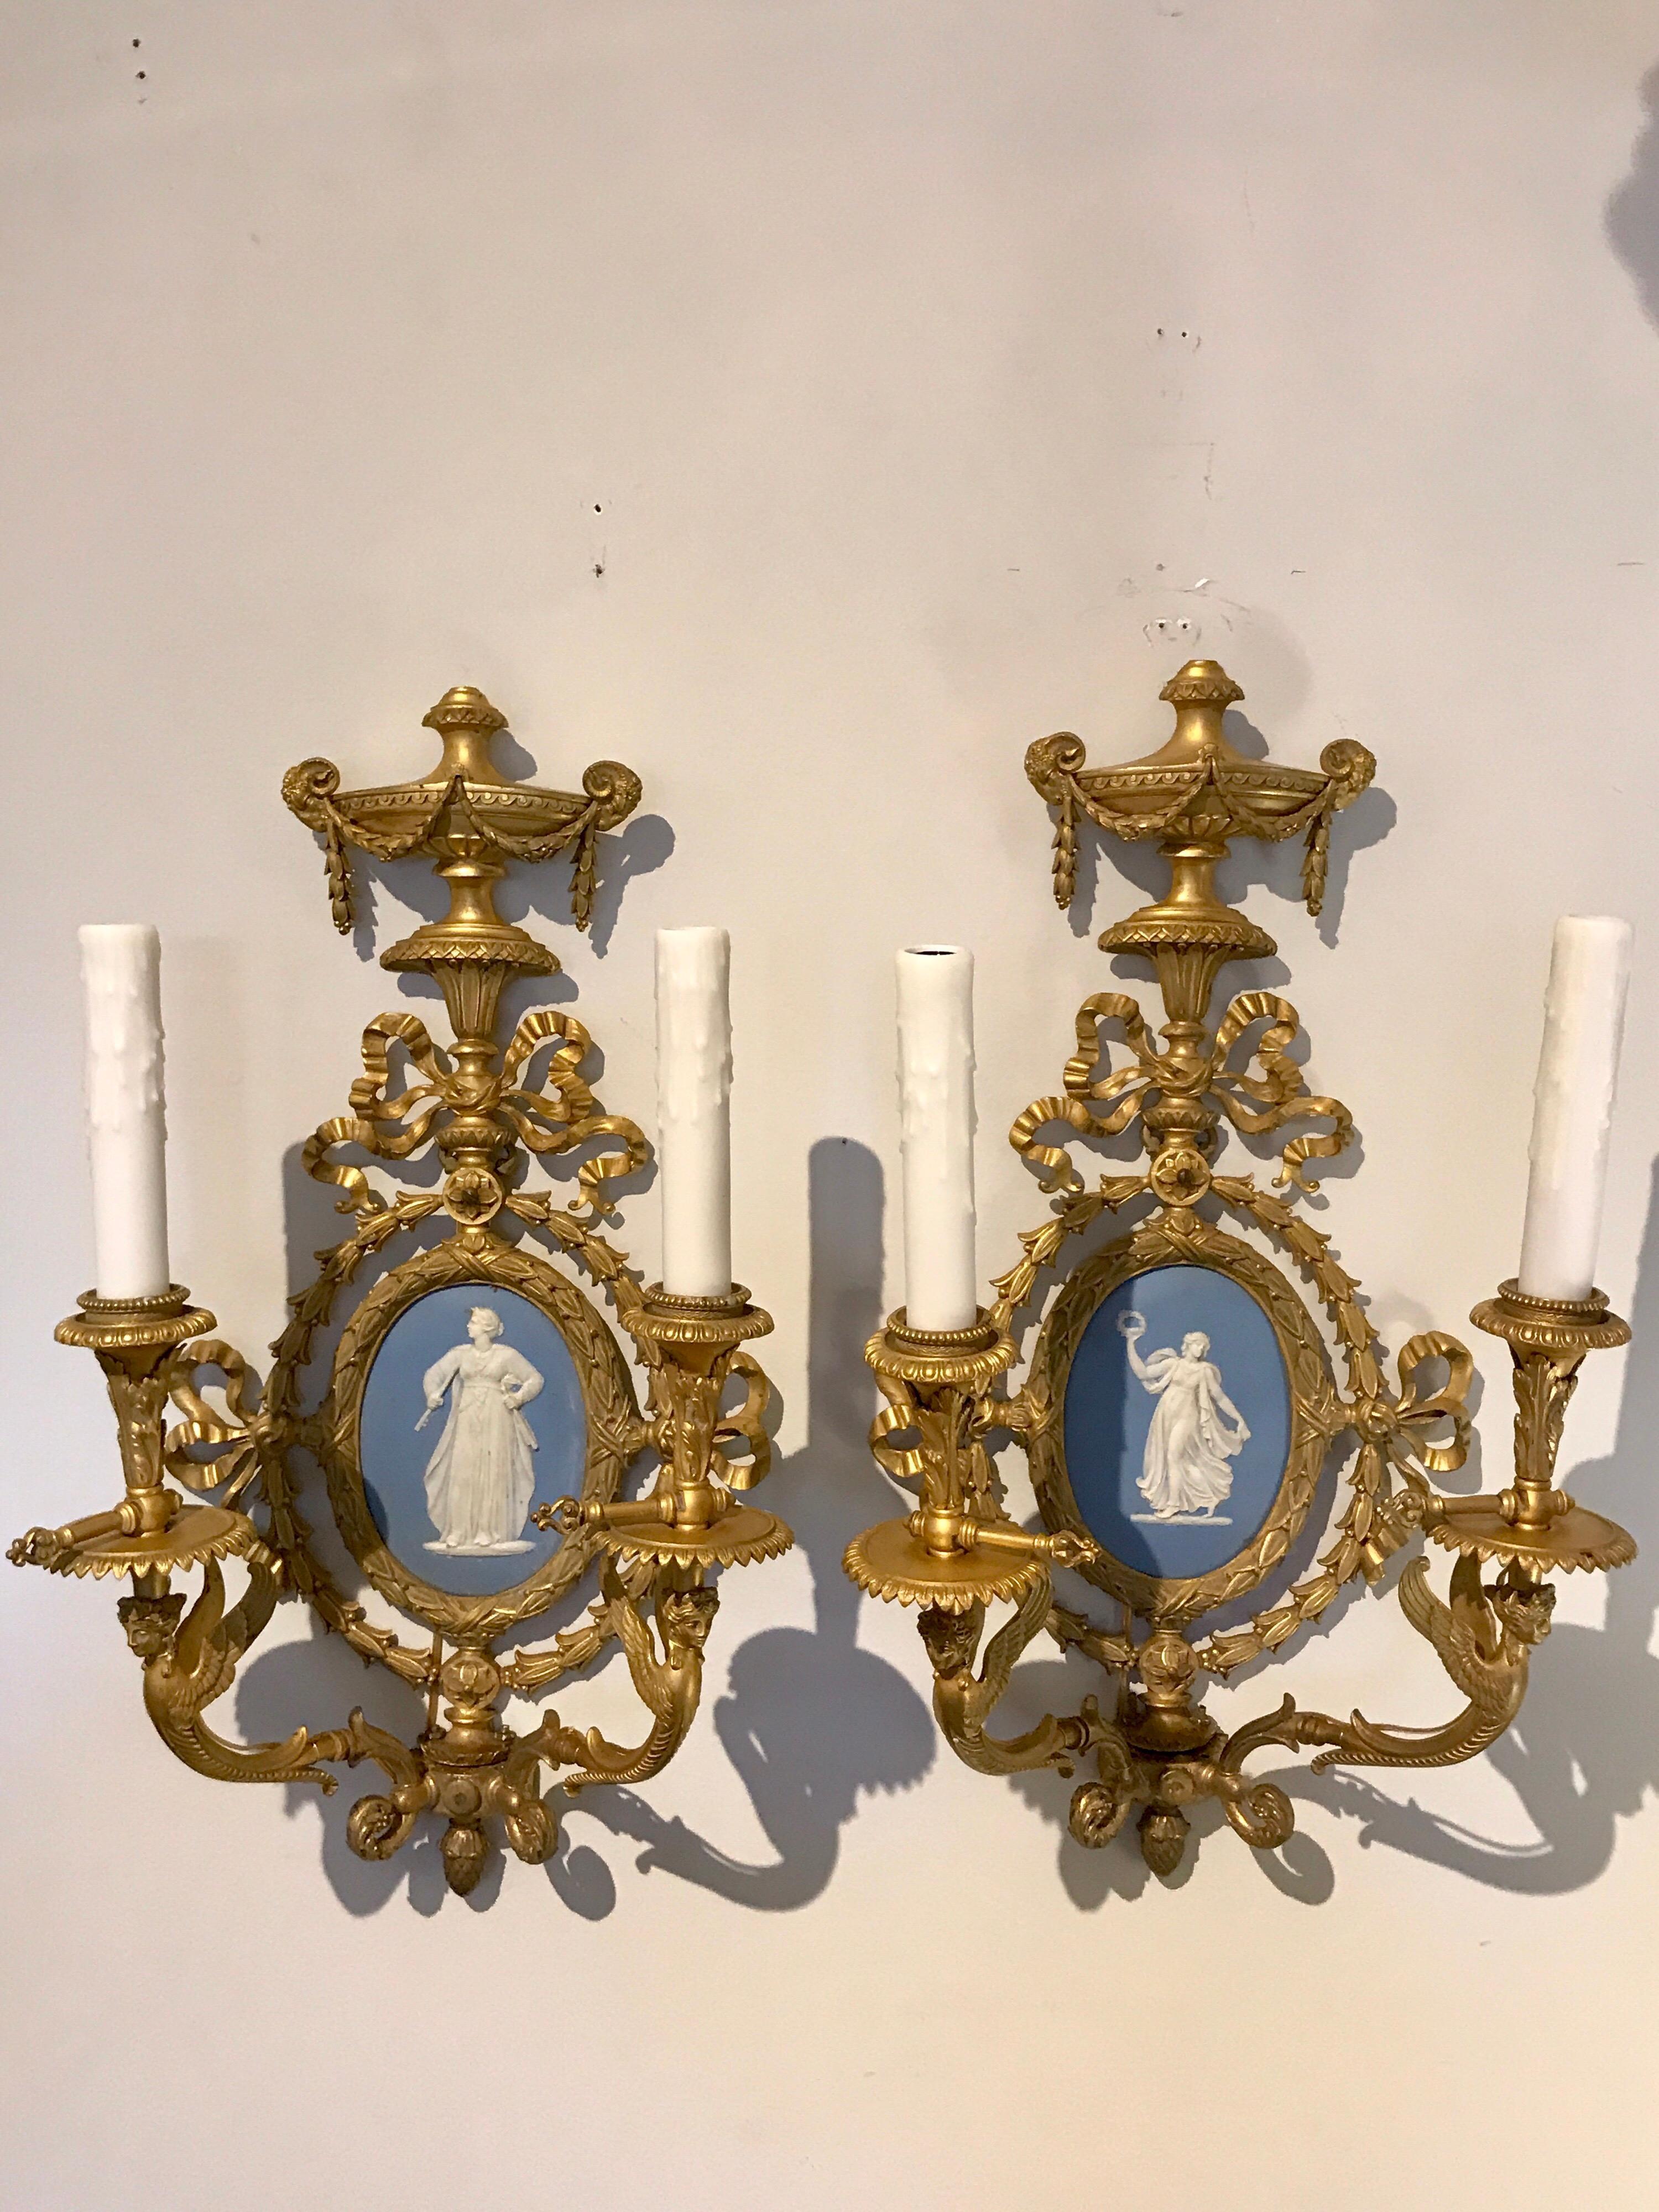 Pair of exquisite Adam style ormolu wall sconces with Wedgwood plaques, originally fitted for gas, now electrified.